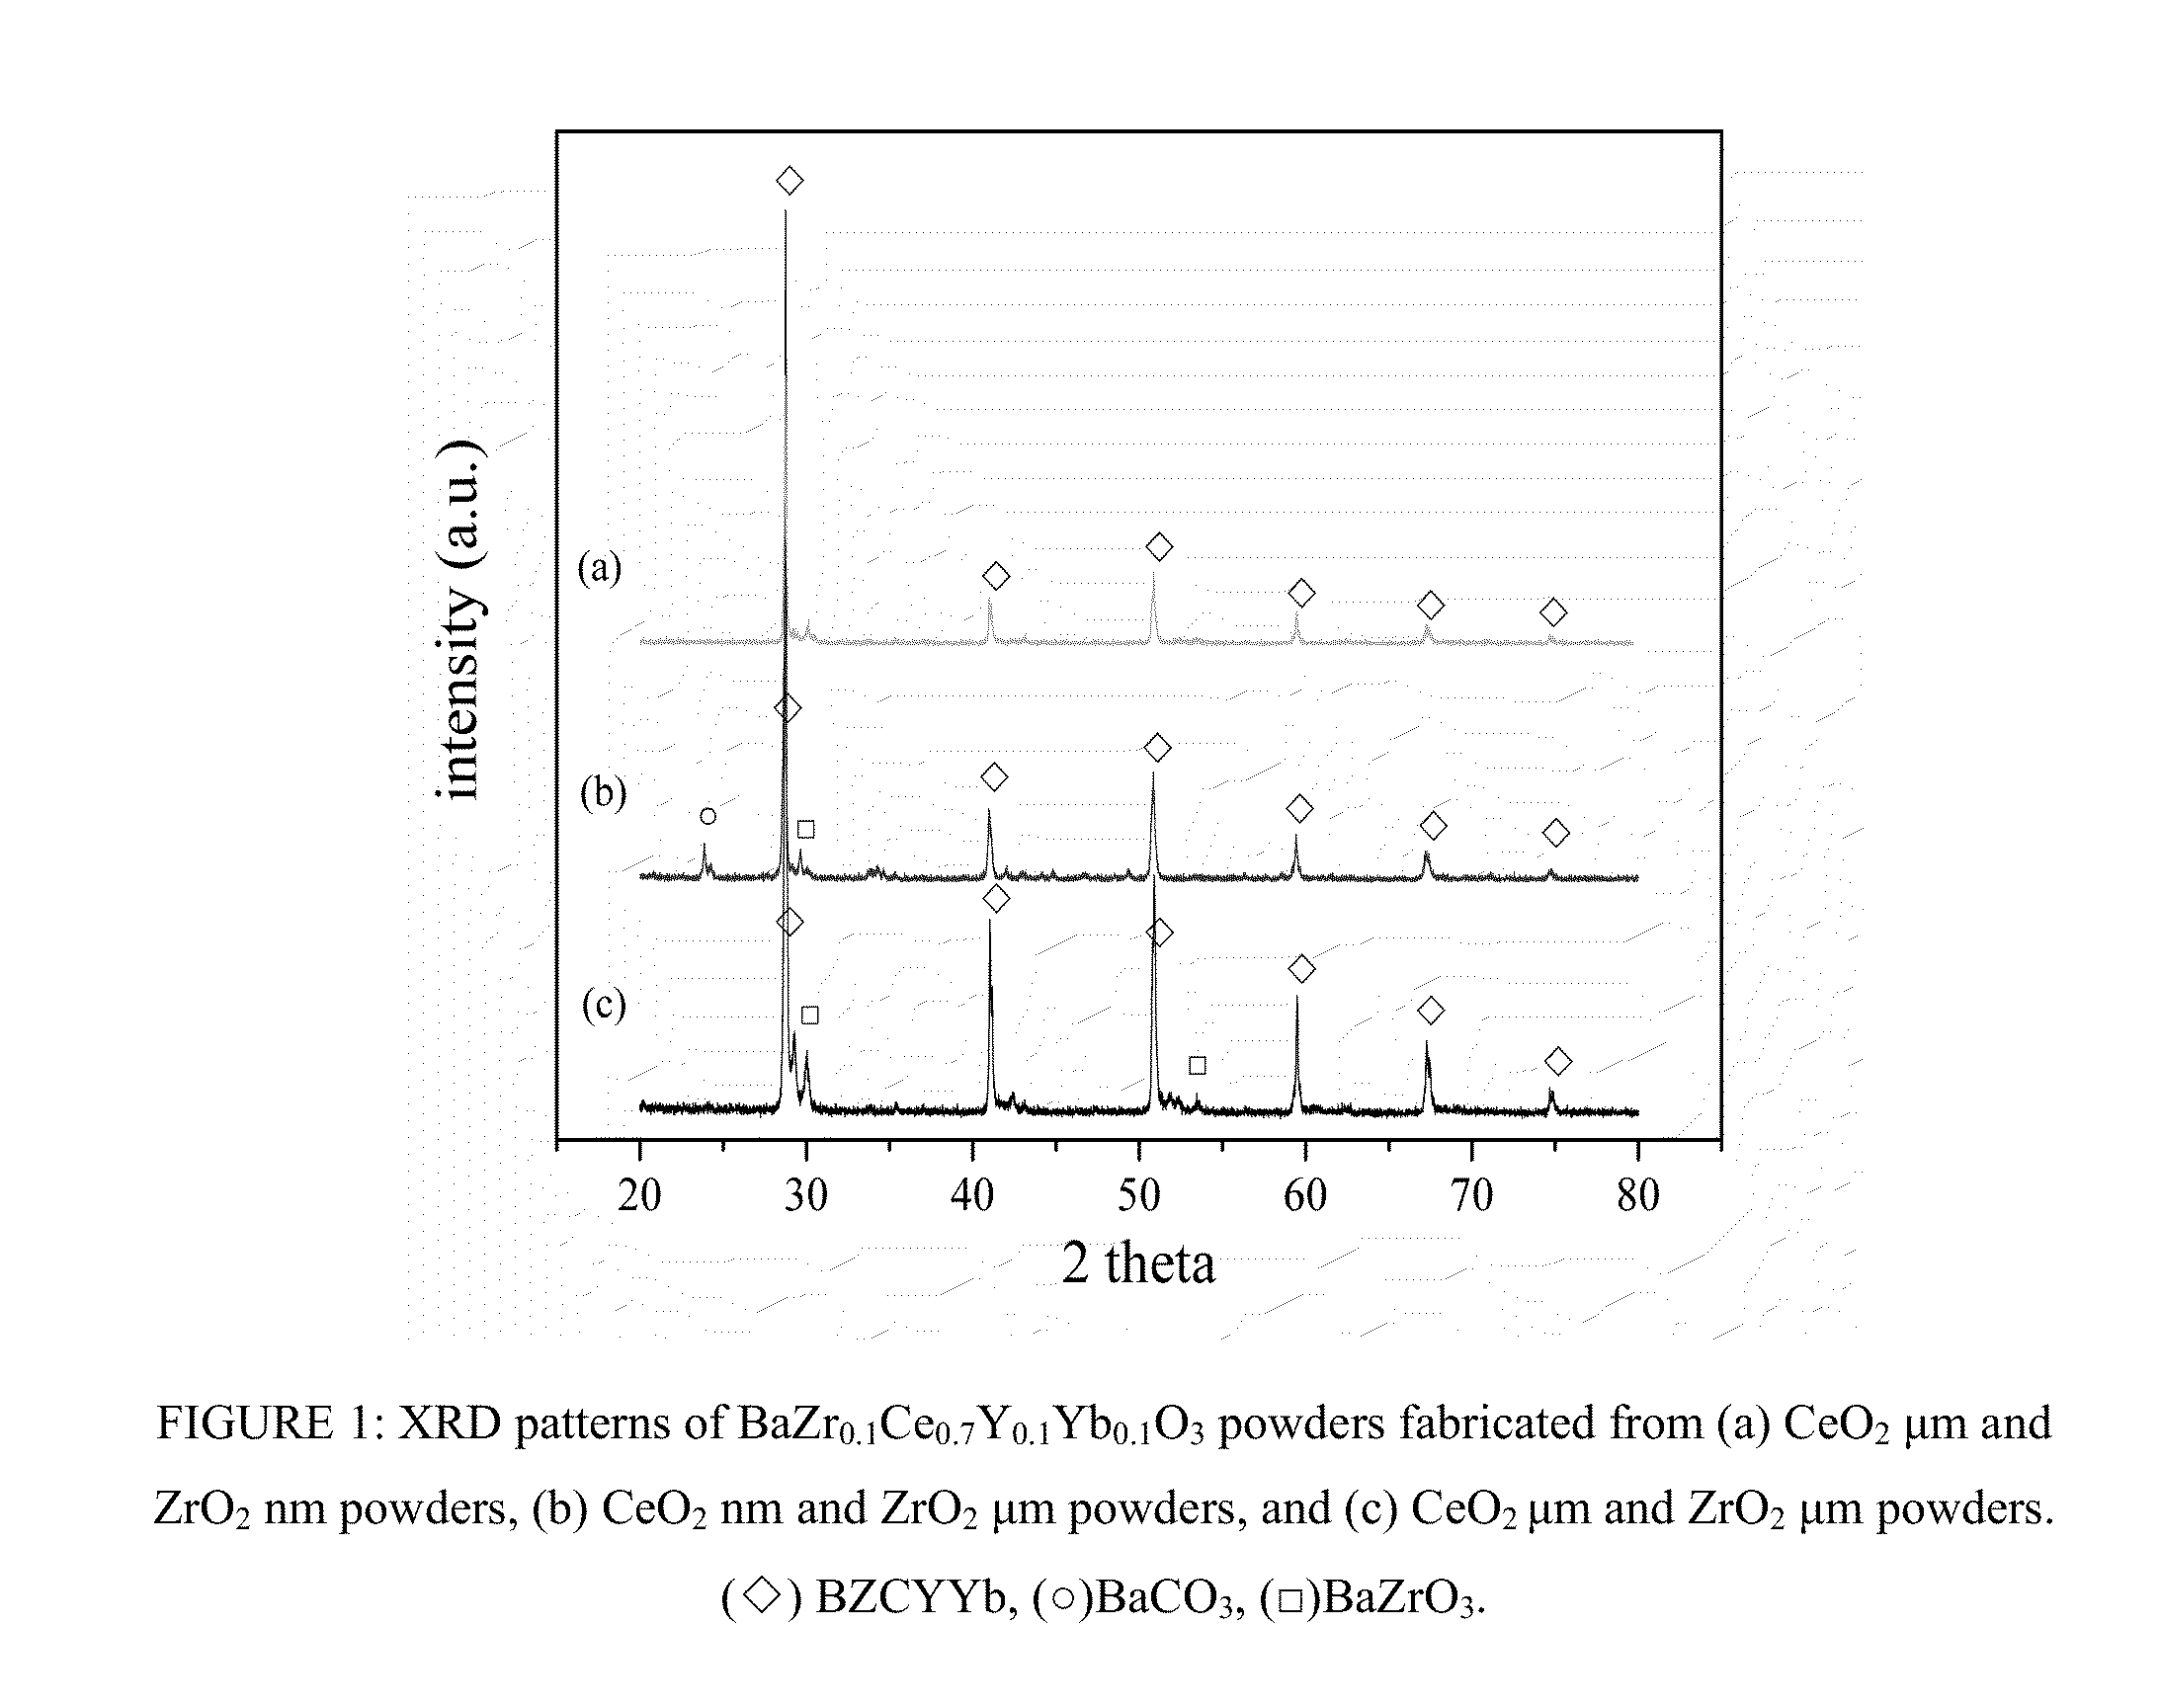 OPTIMIZATION OF BZCYYb SYNTHESIS